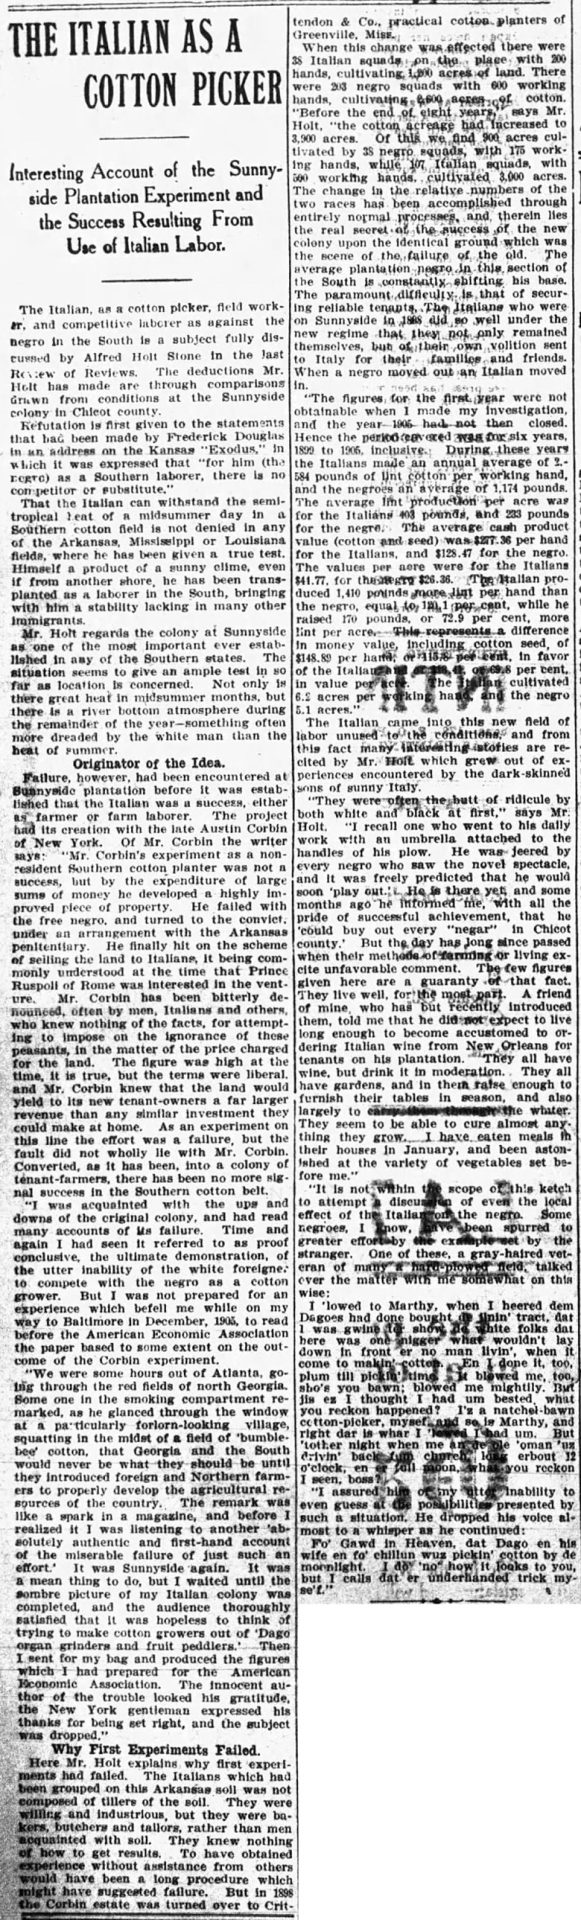 "The Italian as a cotton picker" newspaper clipping